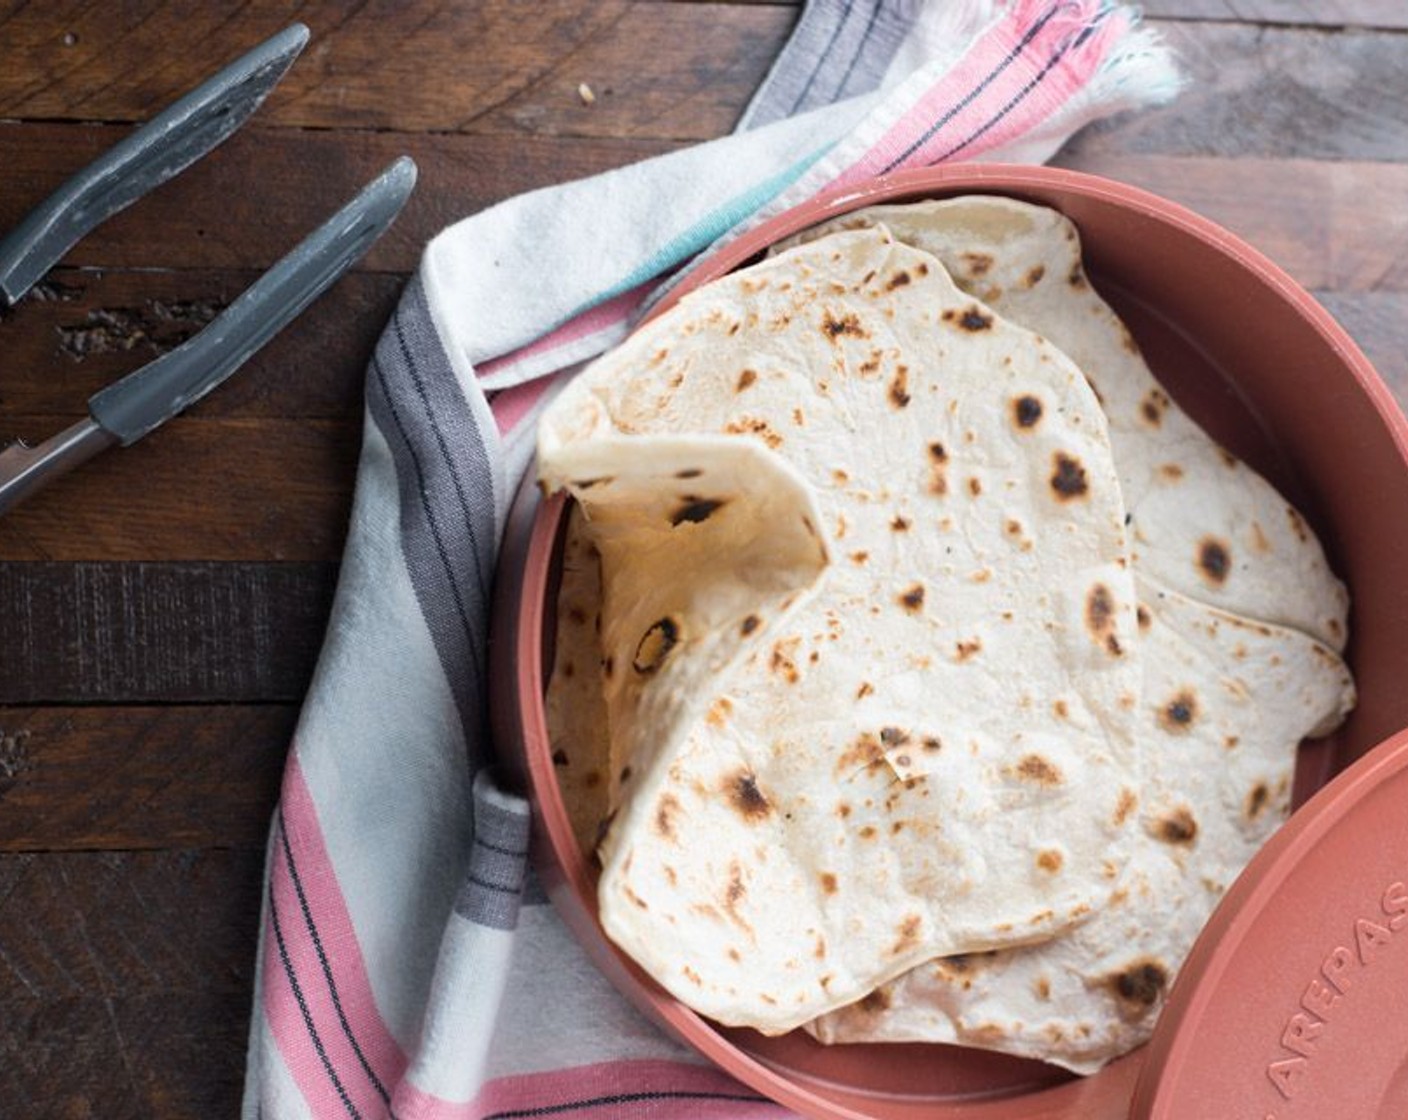 step 7 If not using tortillas within the hour, save tortillas in a sealed container in the refrigerator until ready to eat. Re-heat tortillas with a wet paper towel and microwave for 20 to 30 seconds.